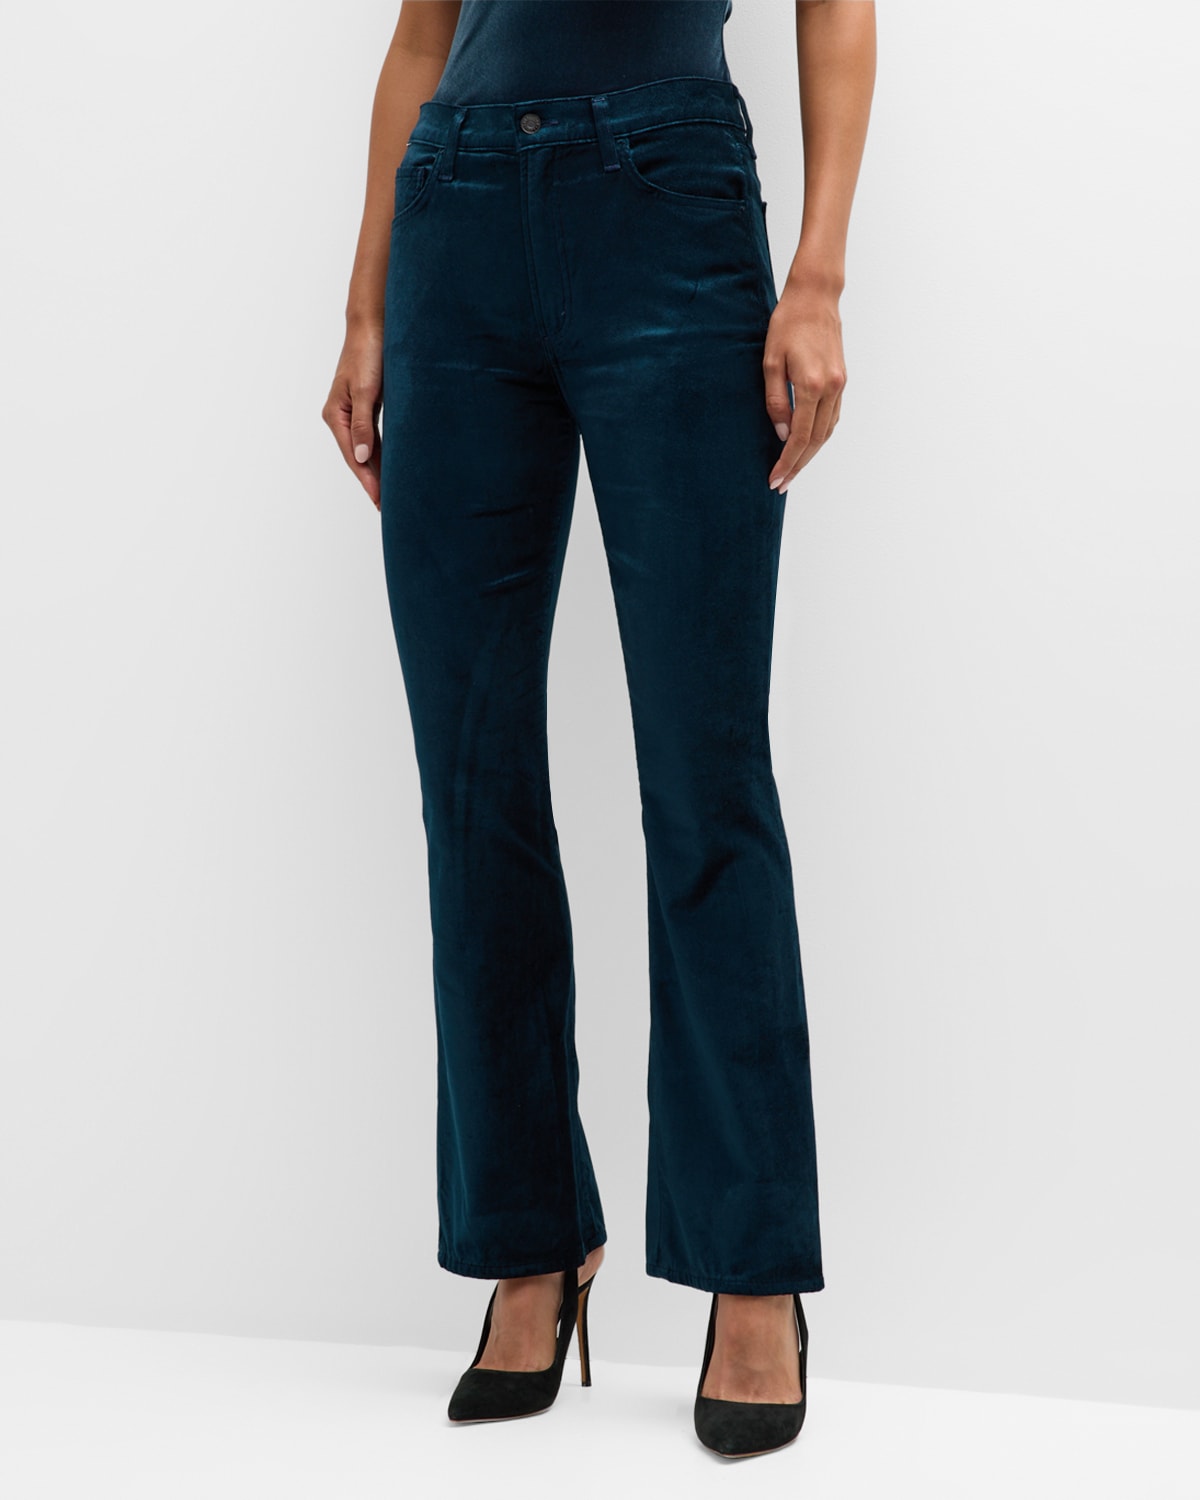 Agolde Nico High-rise Velvet Boot-cut Jeans In Teal